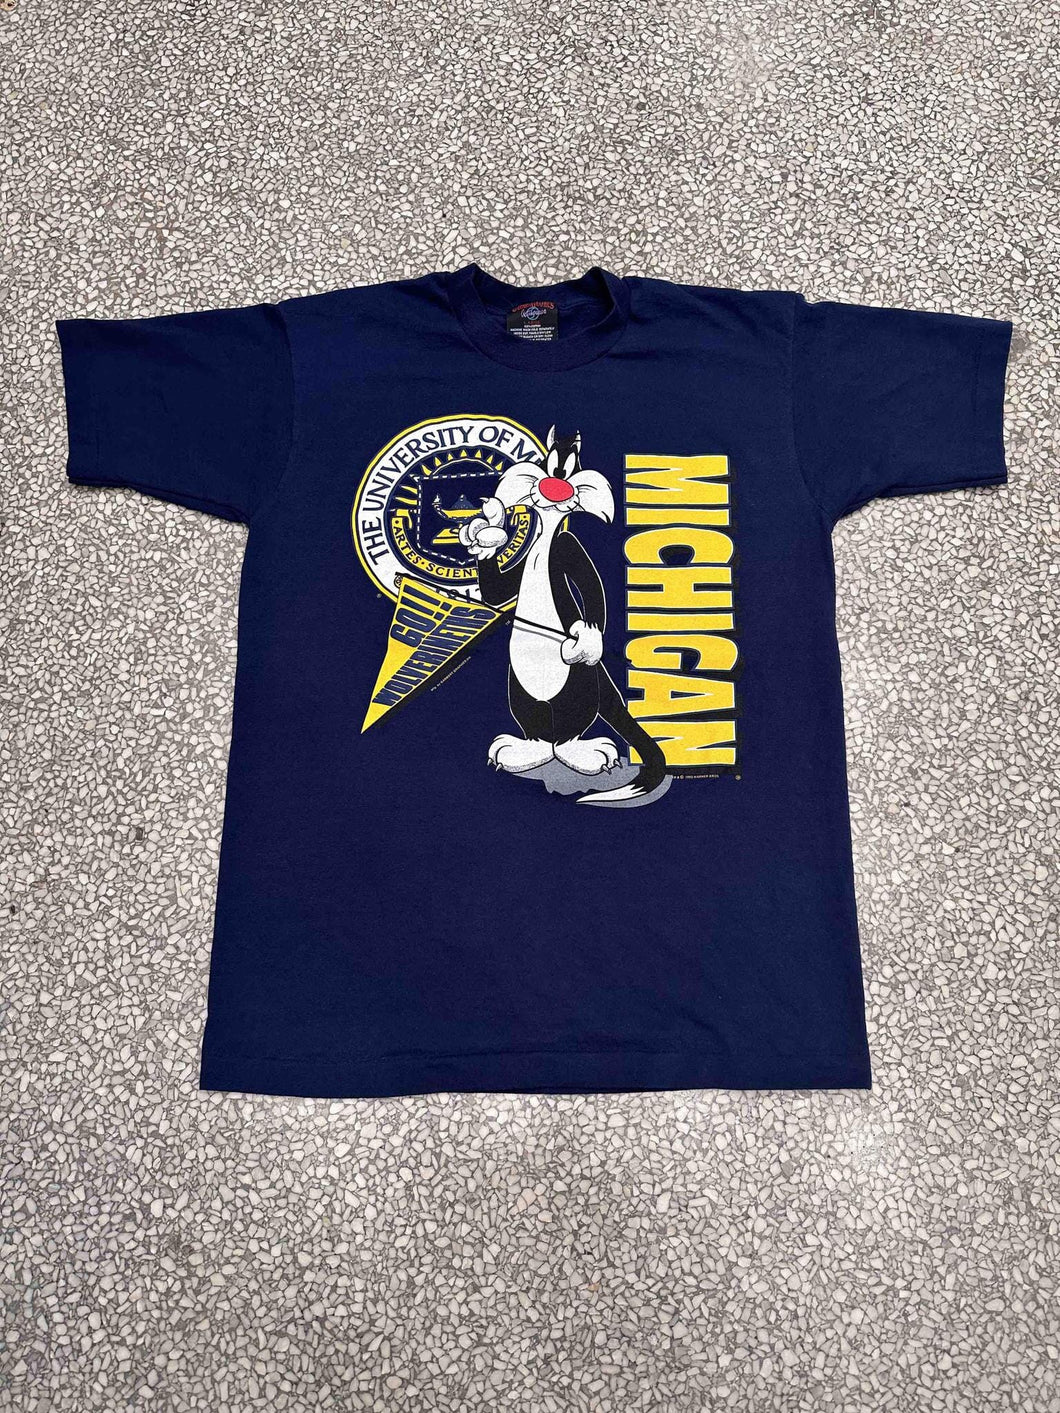 Michigan Wolverines Vintage 1993 Sylvester the Cat Navy ABC Vintage 